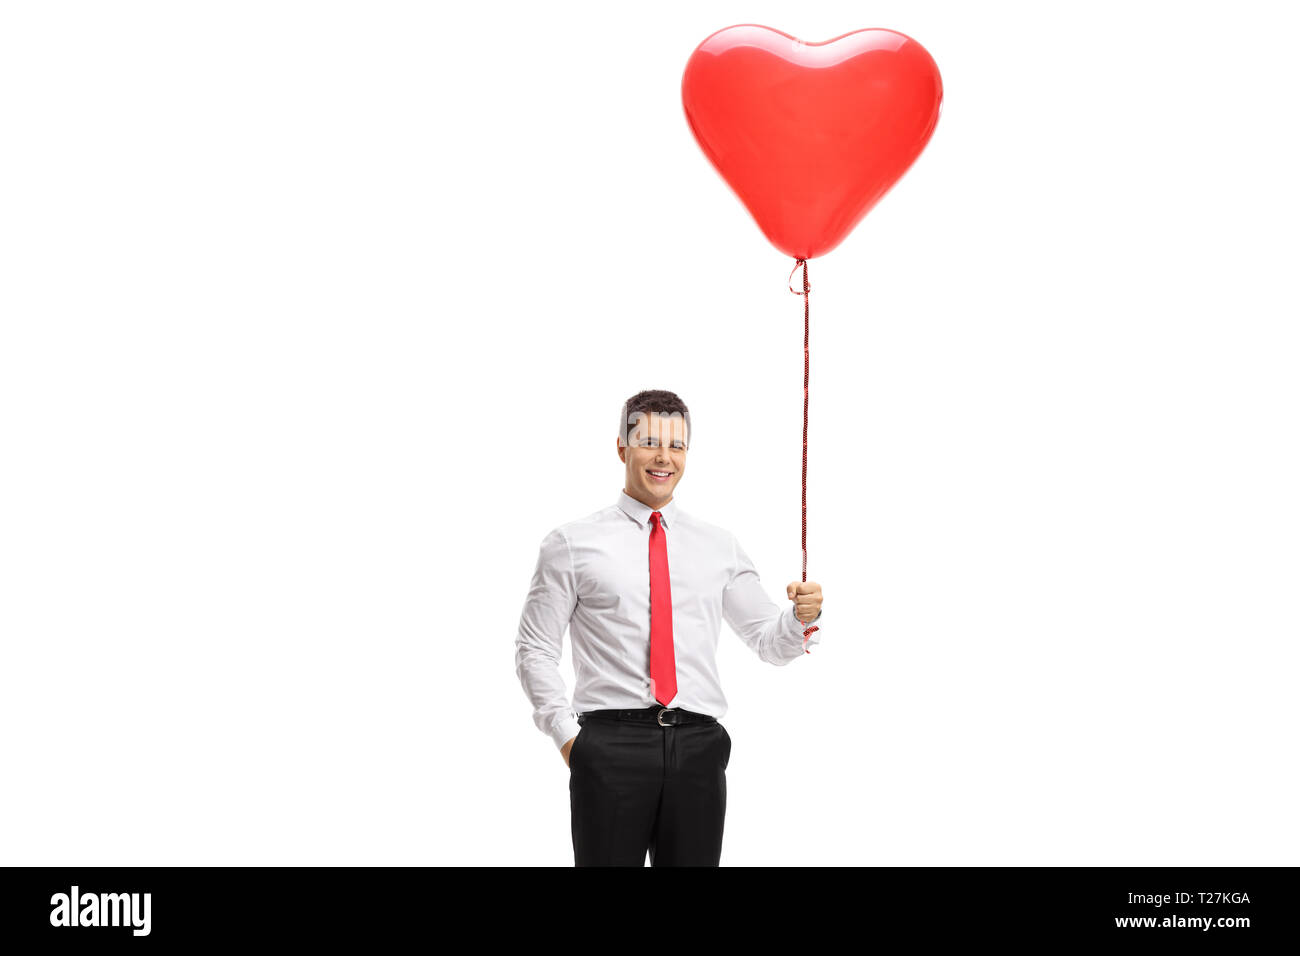 Young man holding a heart shaped balloon isolated on white background Stock Photo